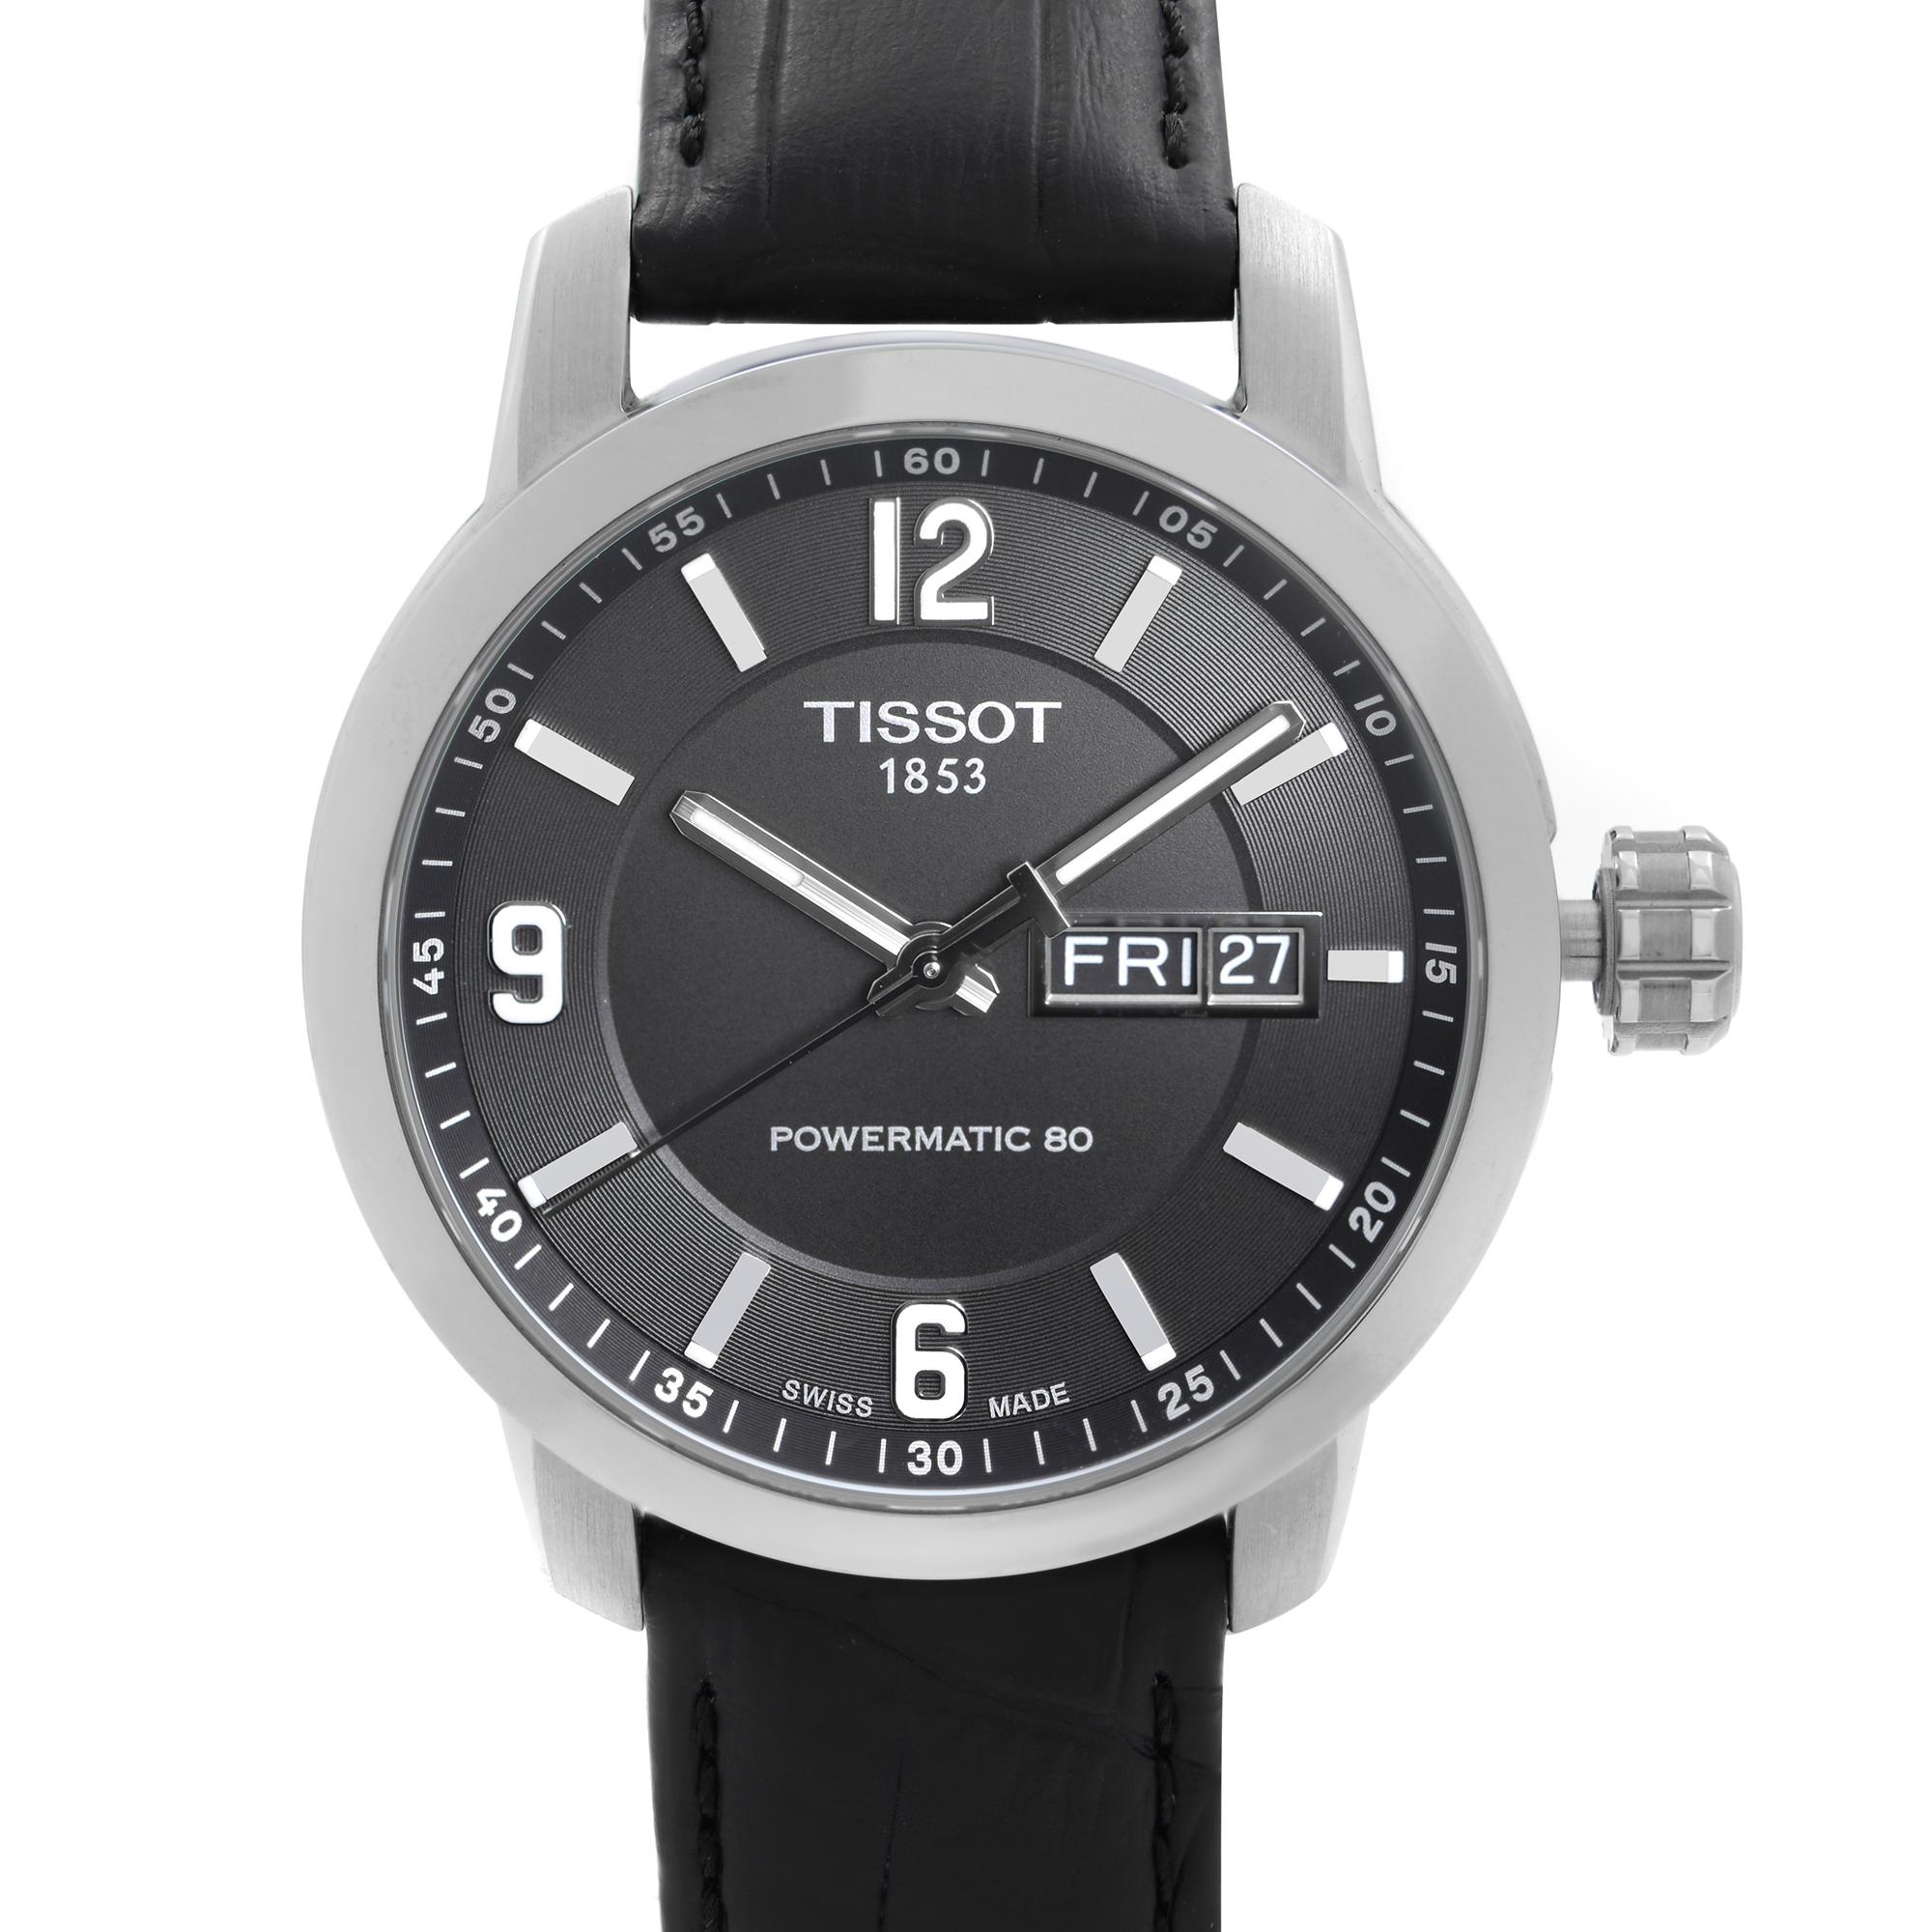 Display Tissot PRC 200 Men's Watch T055.430.16.057.00. It has a little imperfections on the band due to storing. This Beautiful Timepiece is Automatic with a Stainless Steel Case and a Two-Piece Leather Straps. Black Dial with Silver-Tone Luminous